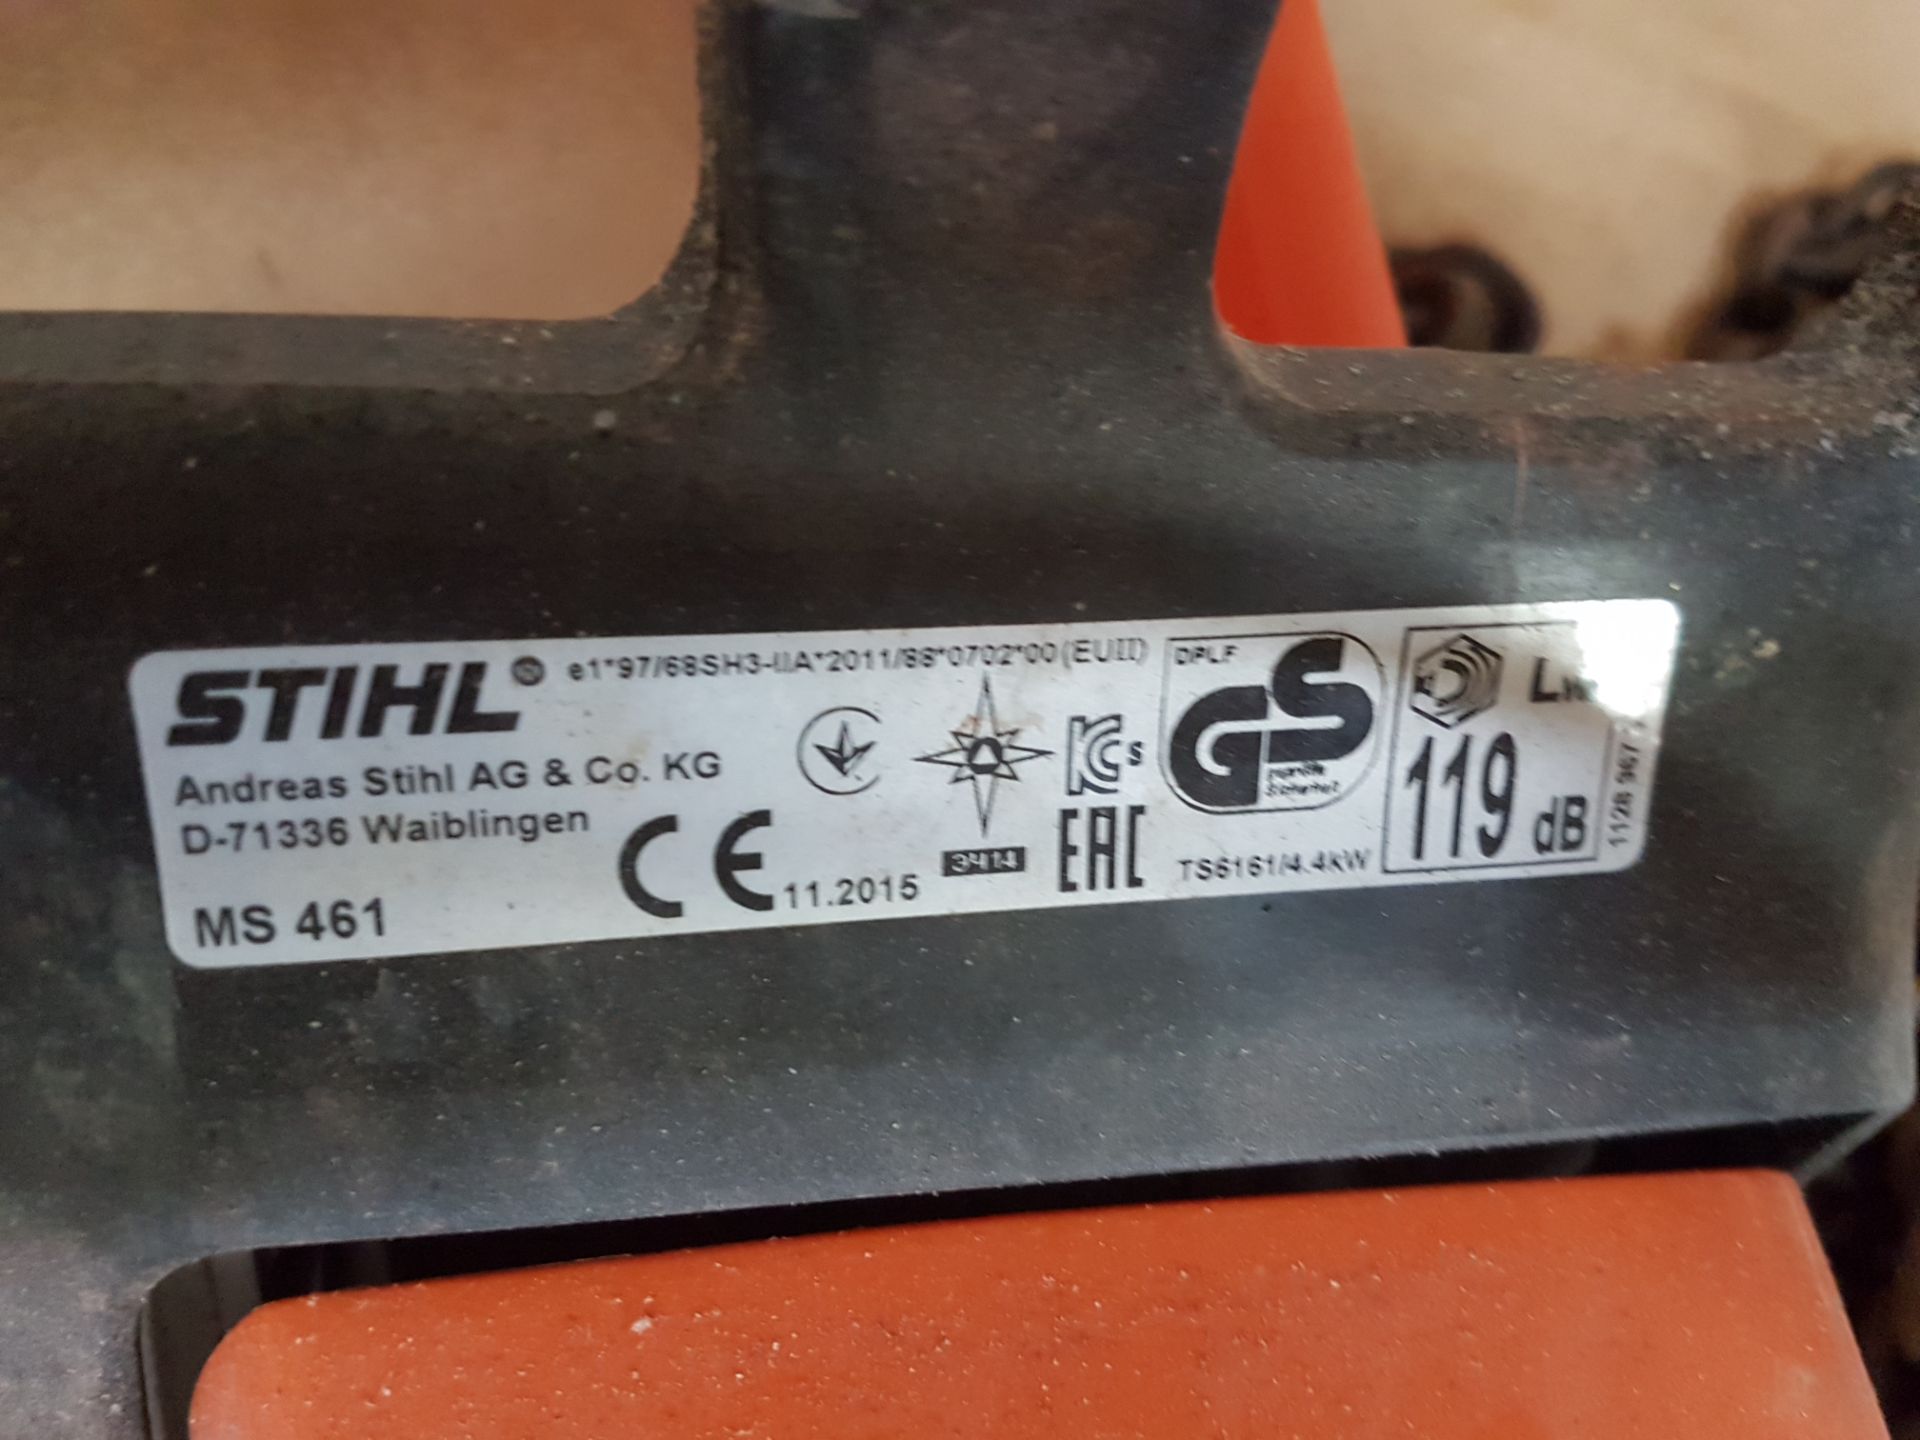 1 x Stihl MS461 25 Inch Professional High Performance Pretrol Chainsaw - CL303 - Location: North - Image 5 of 5